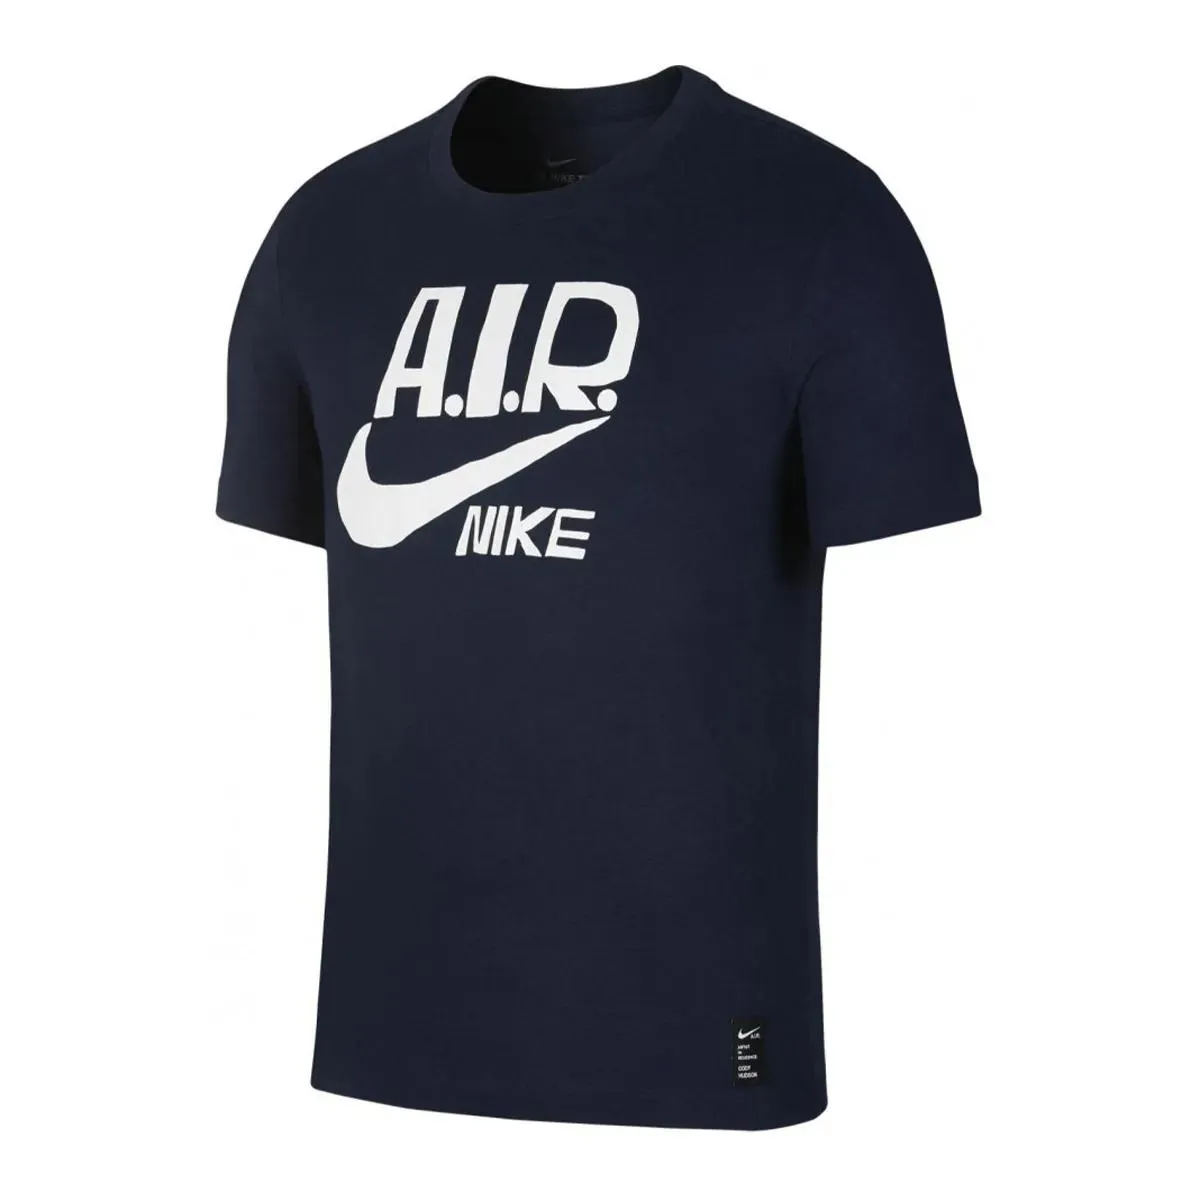 Nike ODJECA MAJICA M NK DRY TEE A.I.R. COLLECTION 